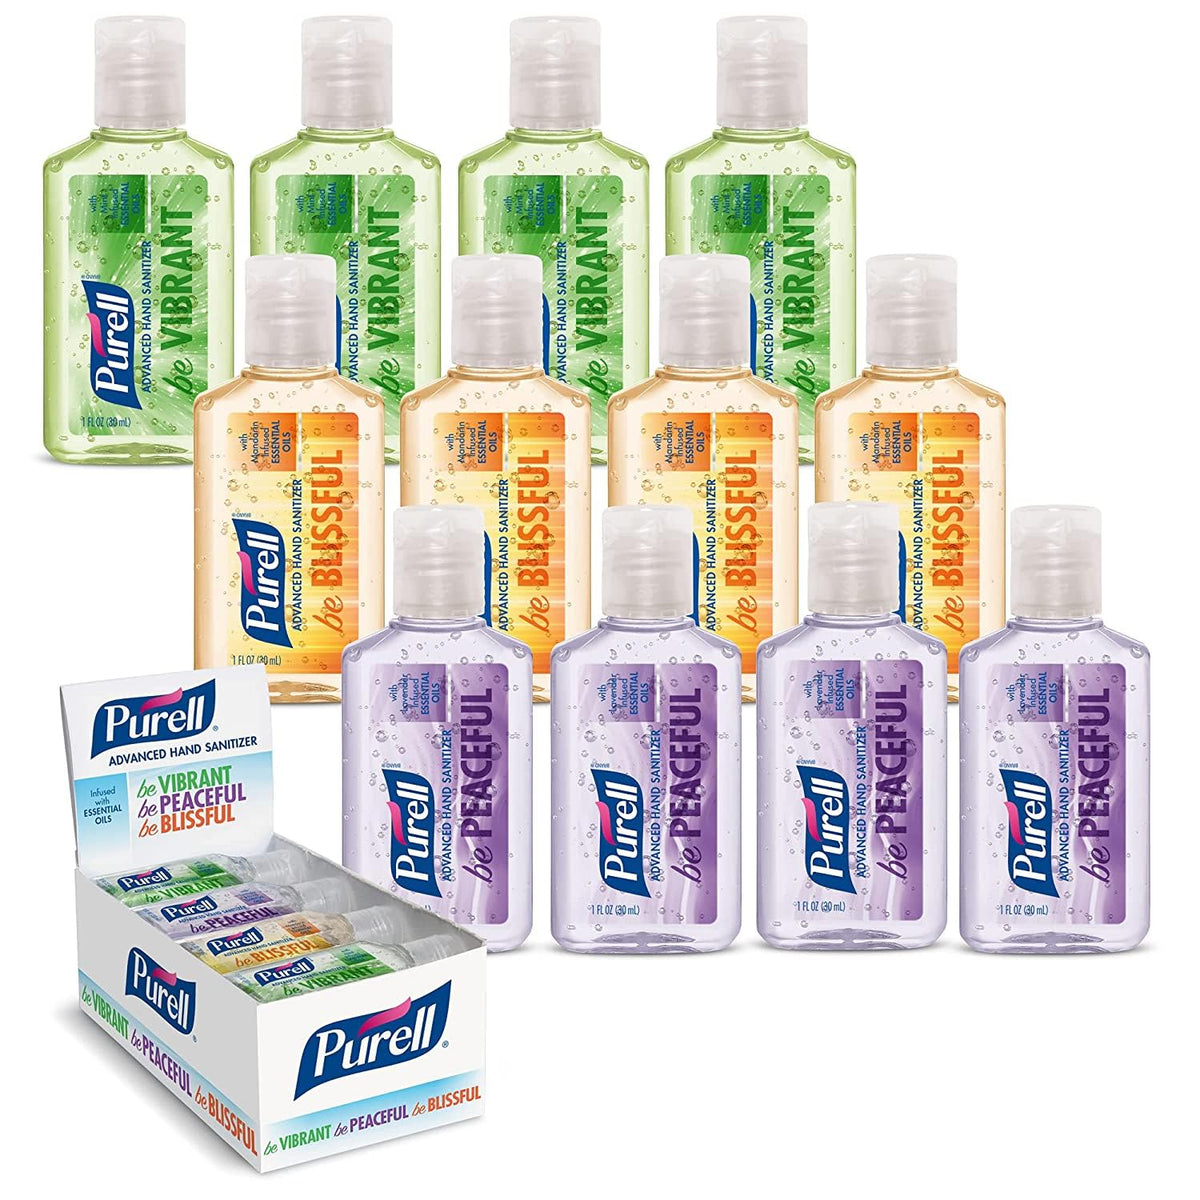 Purell Advanced Hand Sanitizer Gel Infused with Essential Oils, Scented Variety Pack, 1 fl oz Travel Size Flip Cap Bottles (Box of 12 Bottles)- 3901-24-CMRMETRY